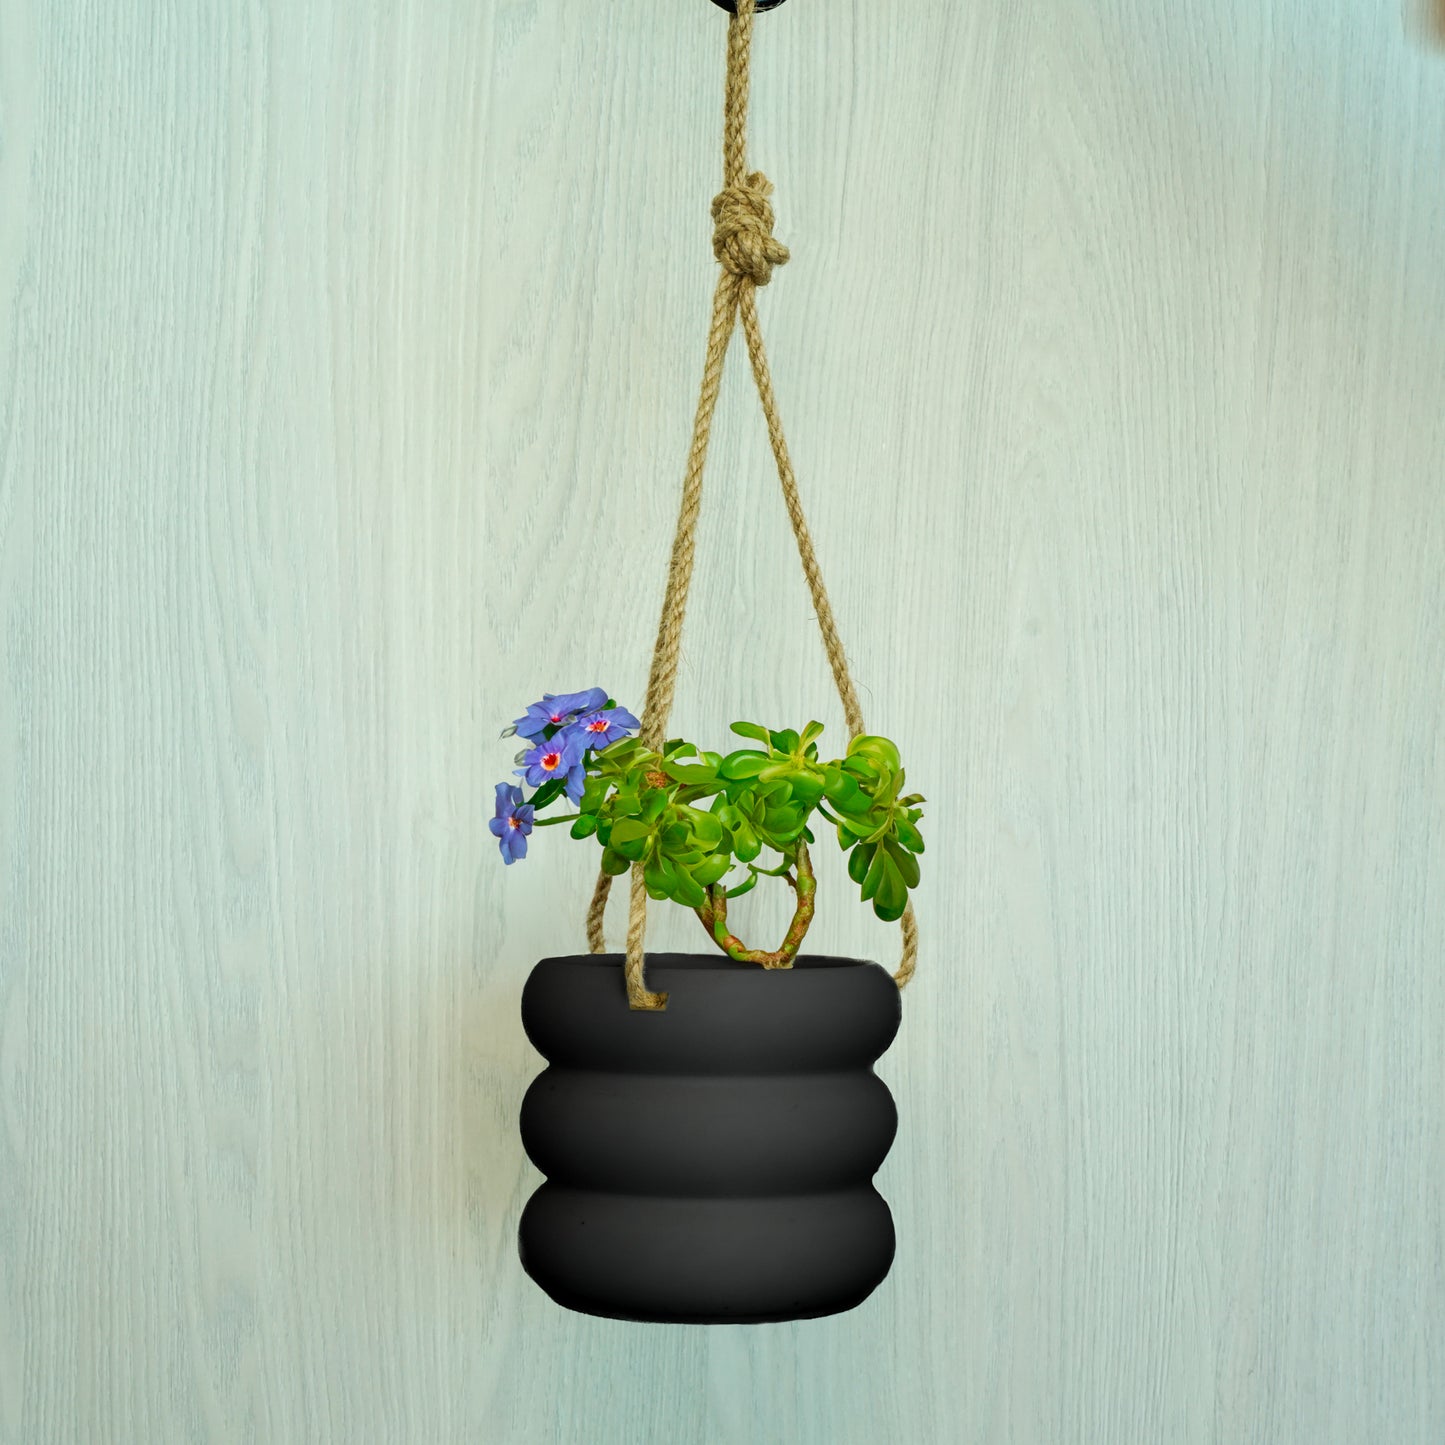 Hanging Bubble Pot, 3D Printed Planter, Hanging Wall Planter with Drainage, Minimal Decor, 4 5 6 7 8 Inch Plant Pots in Matte Terracotta